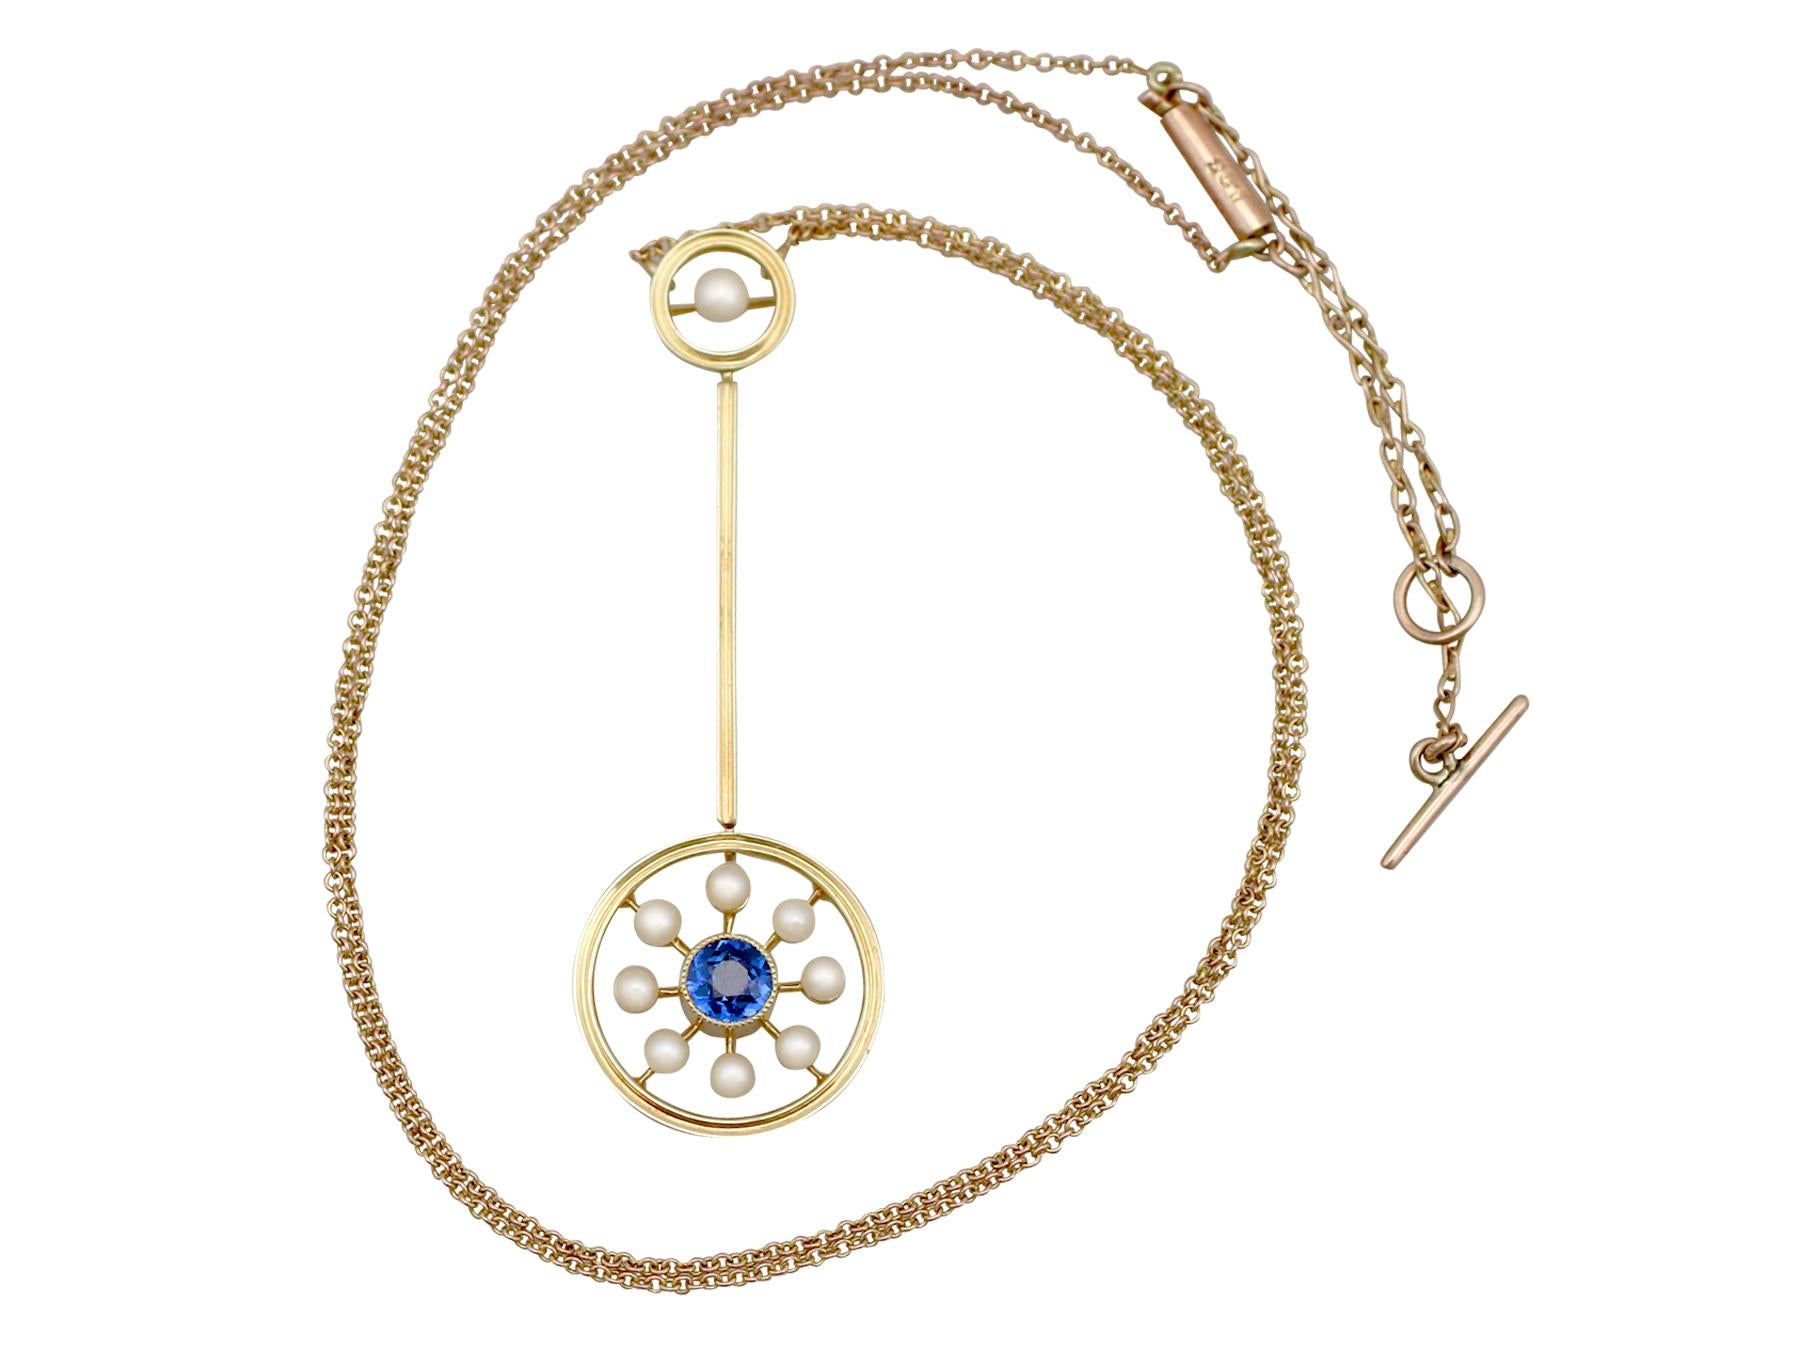 An impressive antique Victorian 0.35 carat sapphire and seed pearl, 15 and 9k yellow gold necklace; part of our diverse antique jewelry and estate jewelry collections.

This fine and impressive antique sapphire necklace has been crafted in 15k